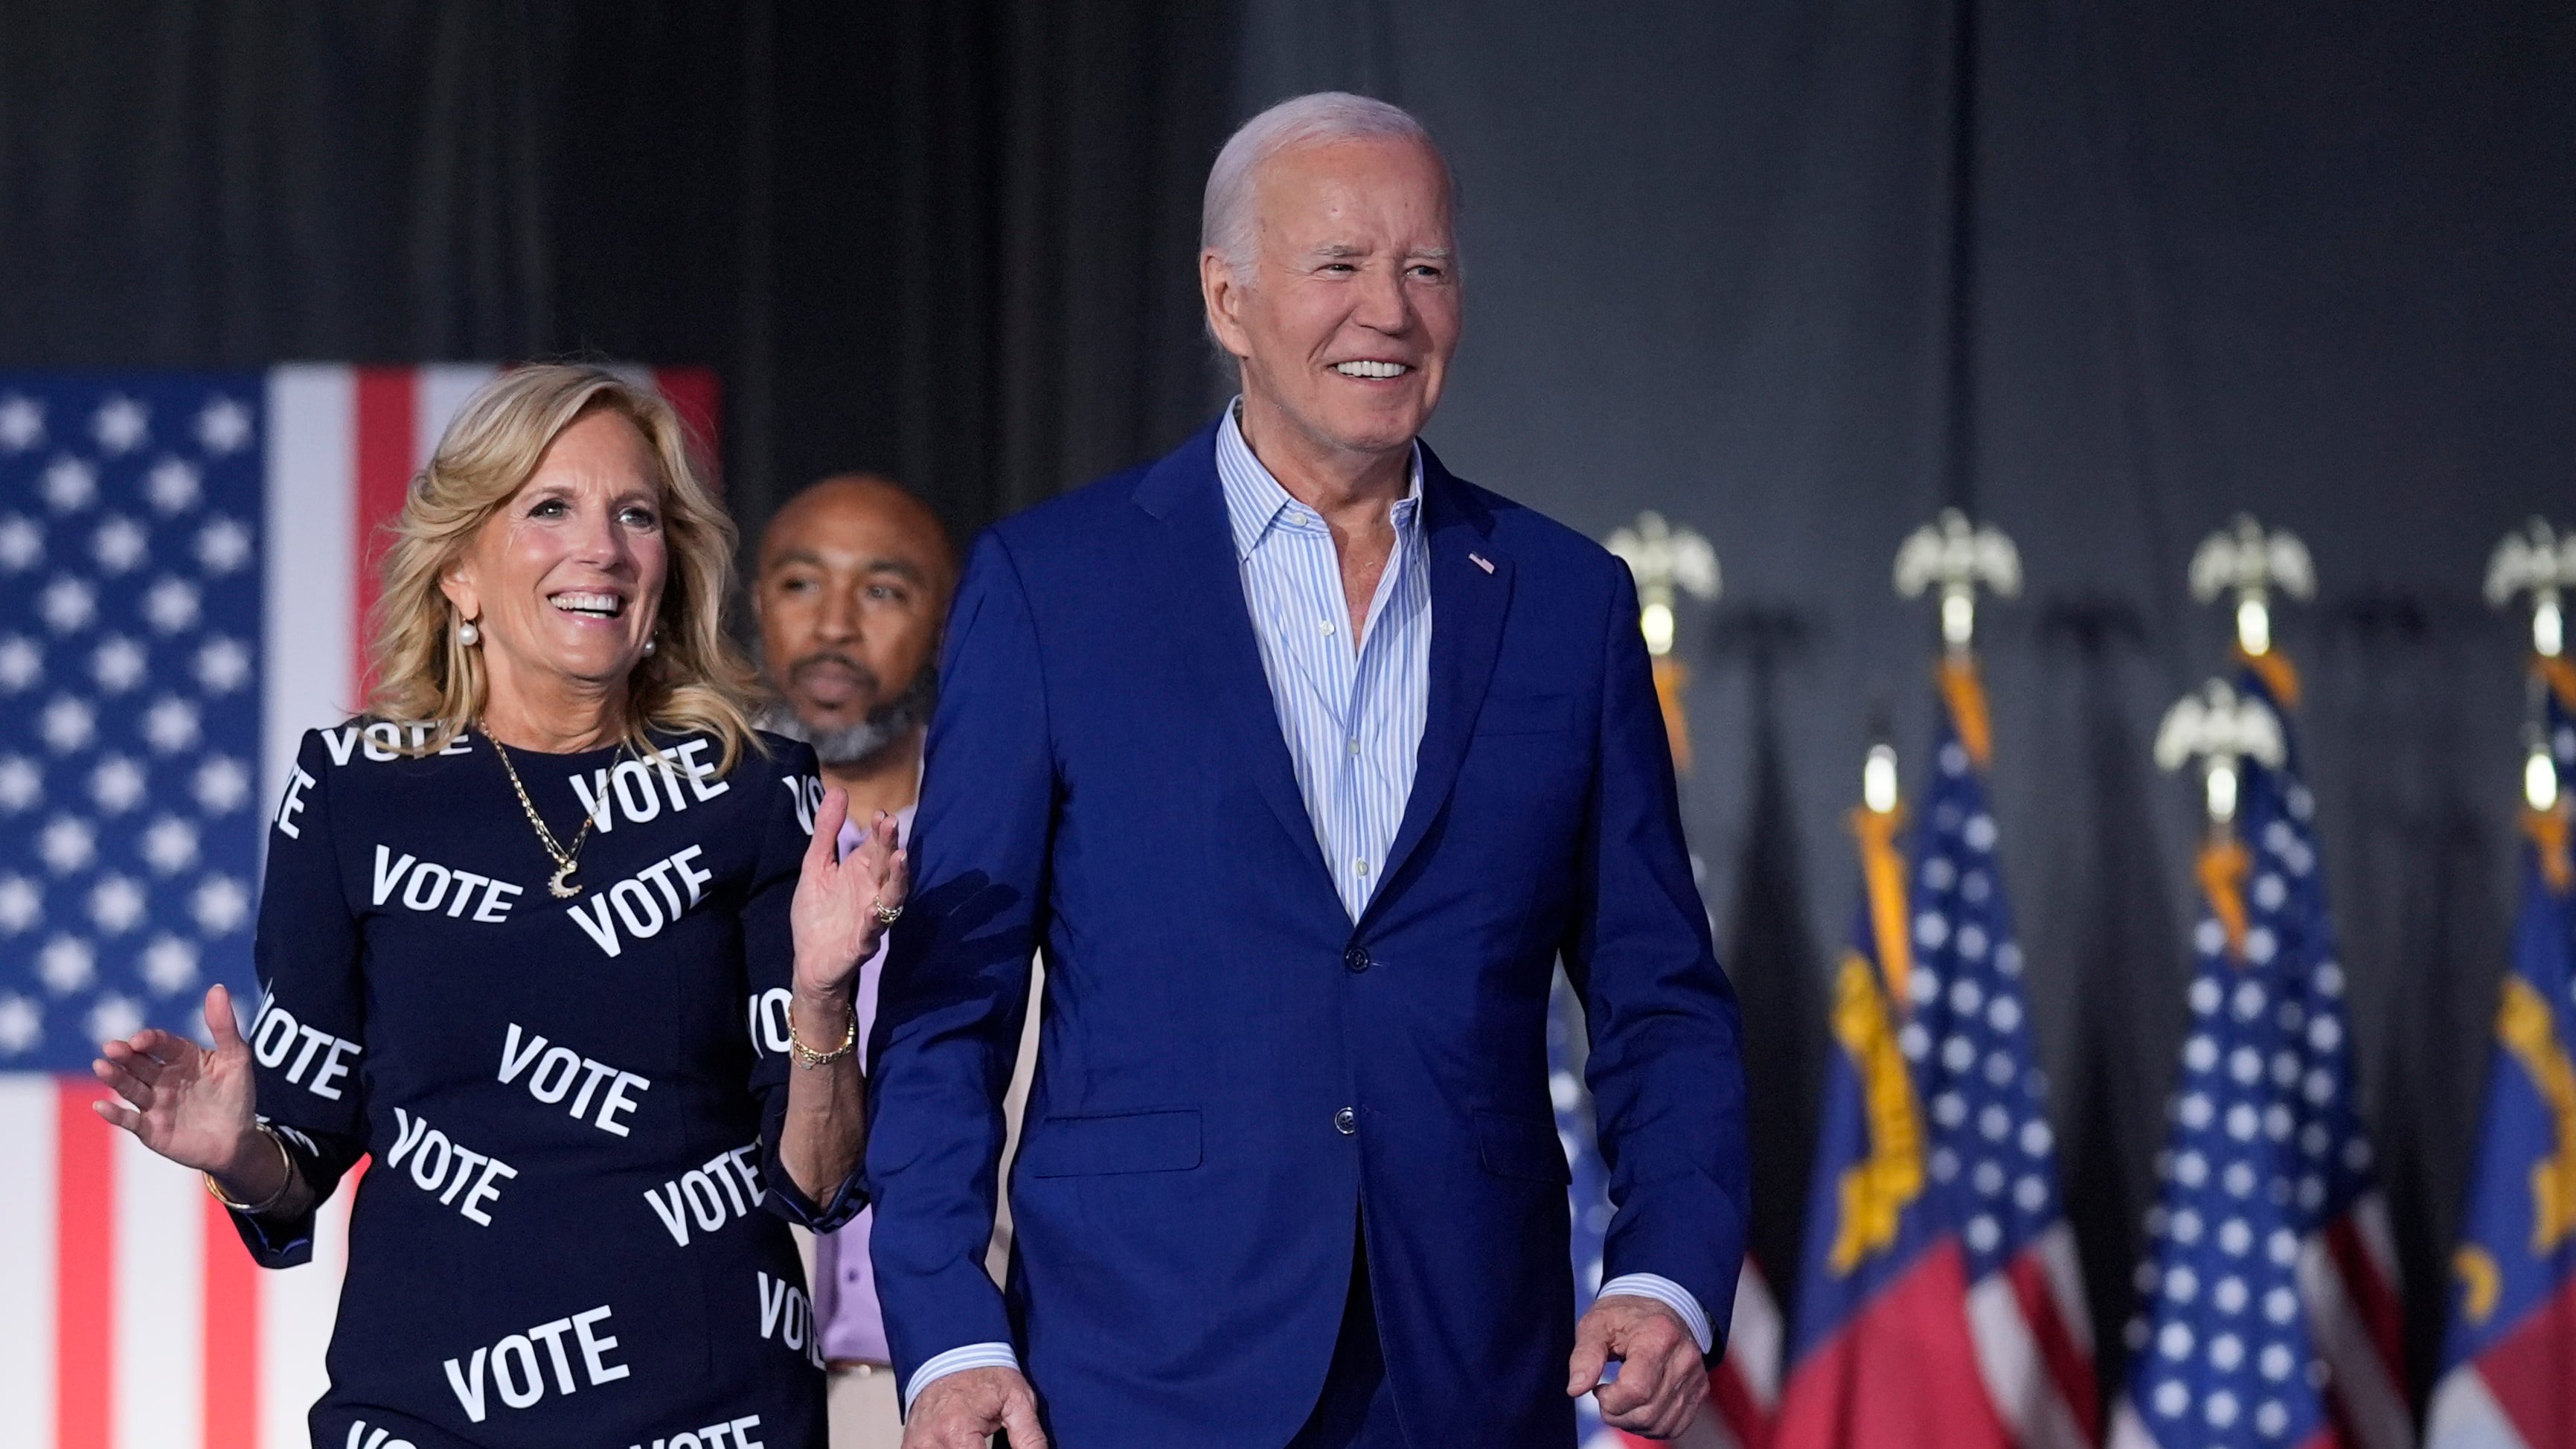 US President Joe Biden and first lady Jill Biden walk to the stage to speak at a campaign rally Raleigh, North Carolina (AP Photo/Evan Vucci)